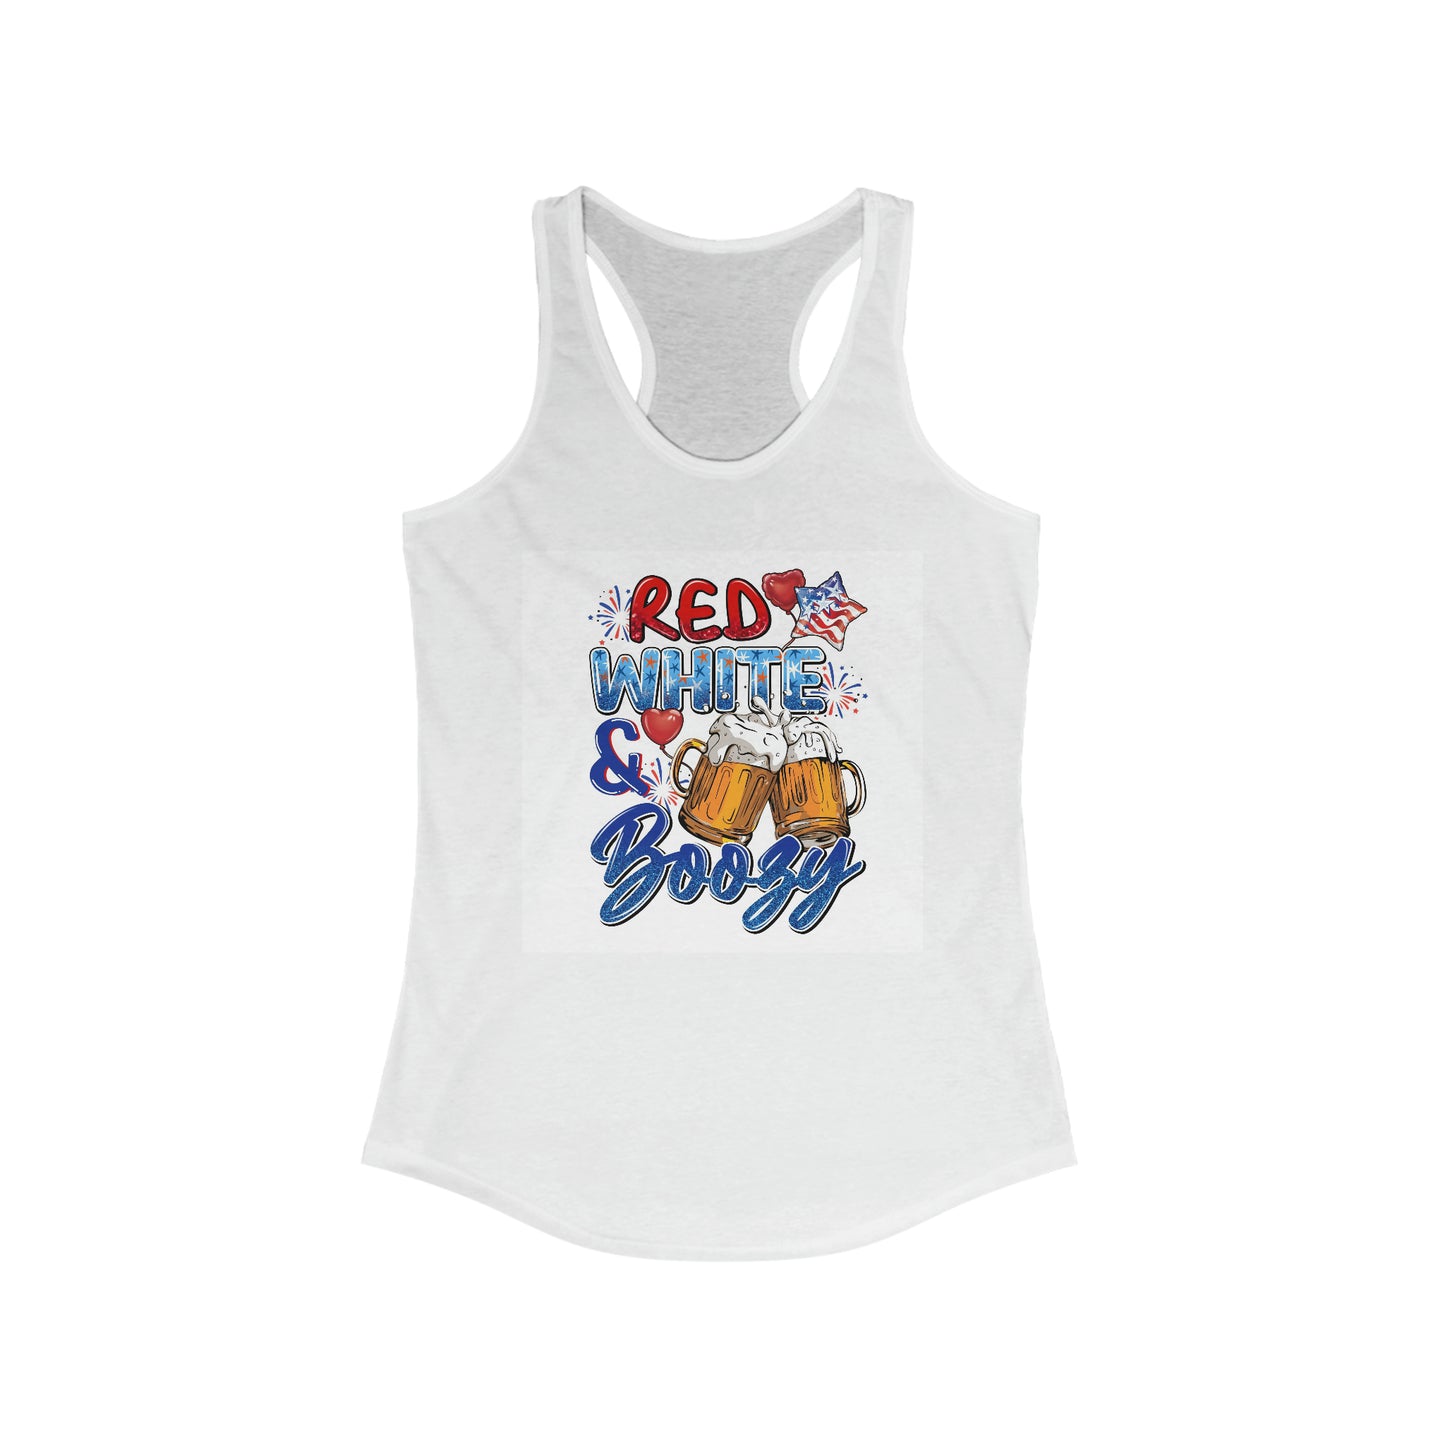 Red White and Boozy Racerback Women's Tank